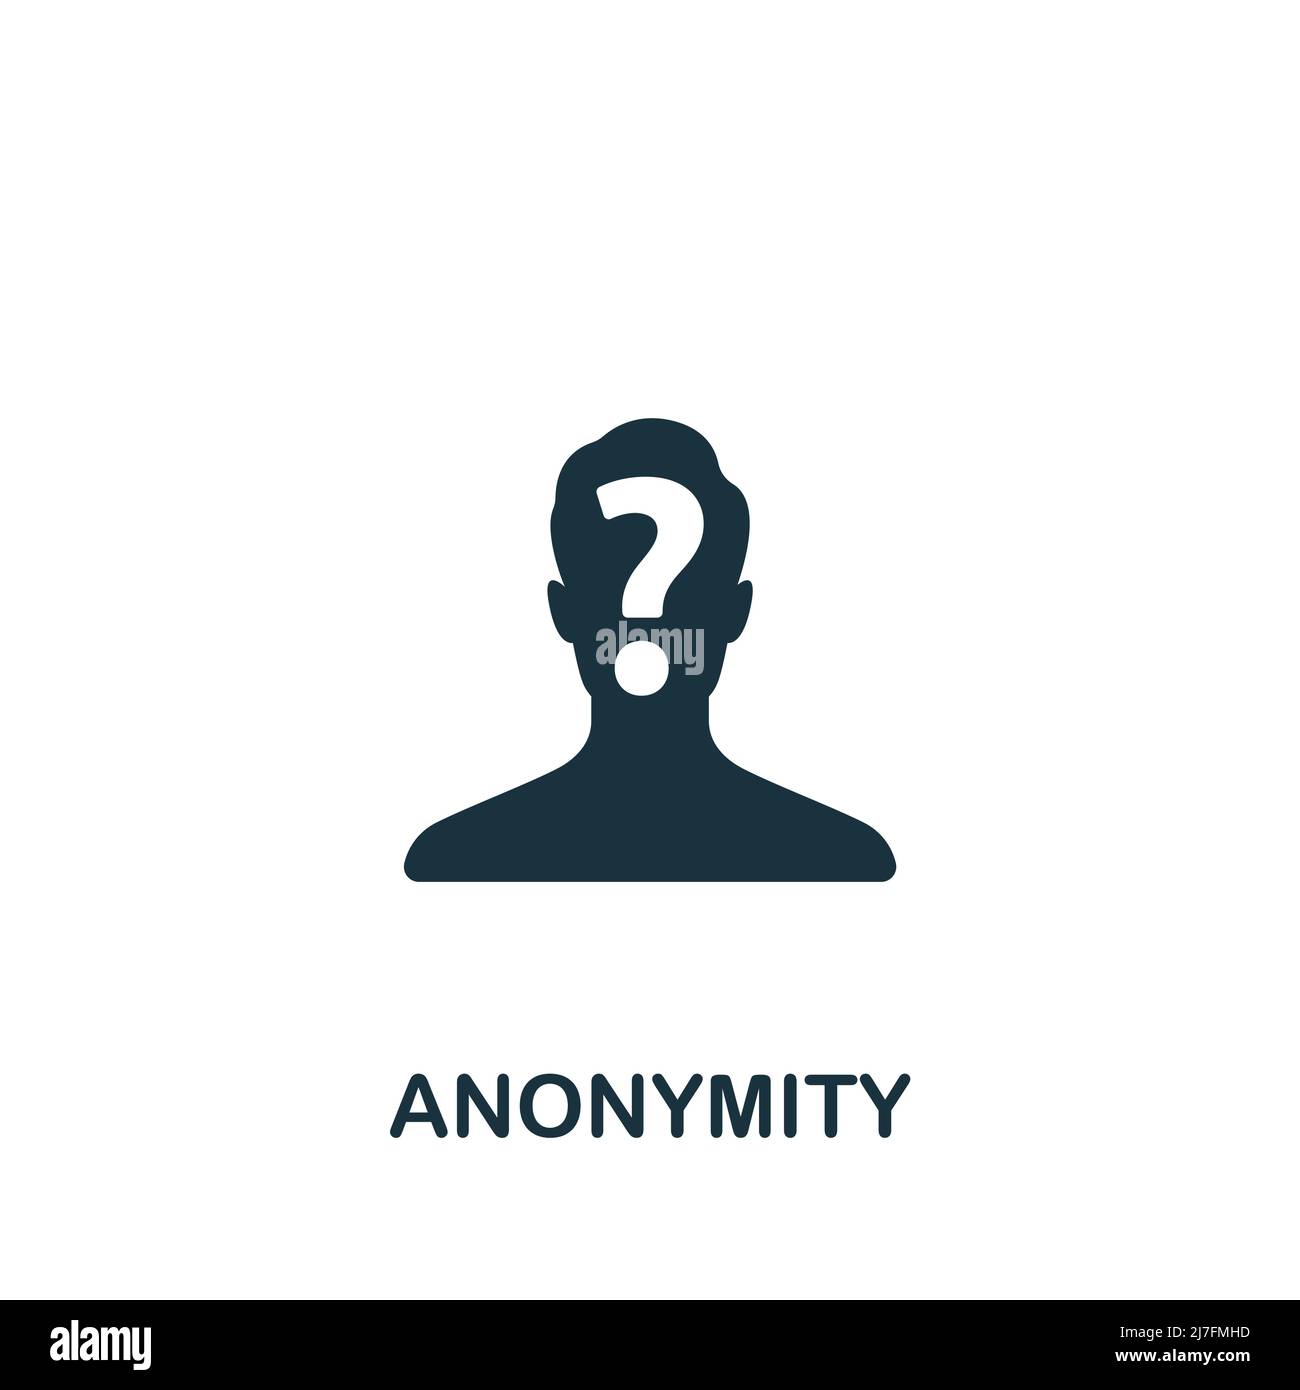 Anonymity icon. Monochrome simple Cryptocurrency icon for templates, web design and infographics Stock Vector